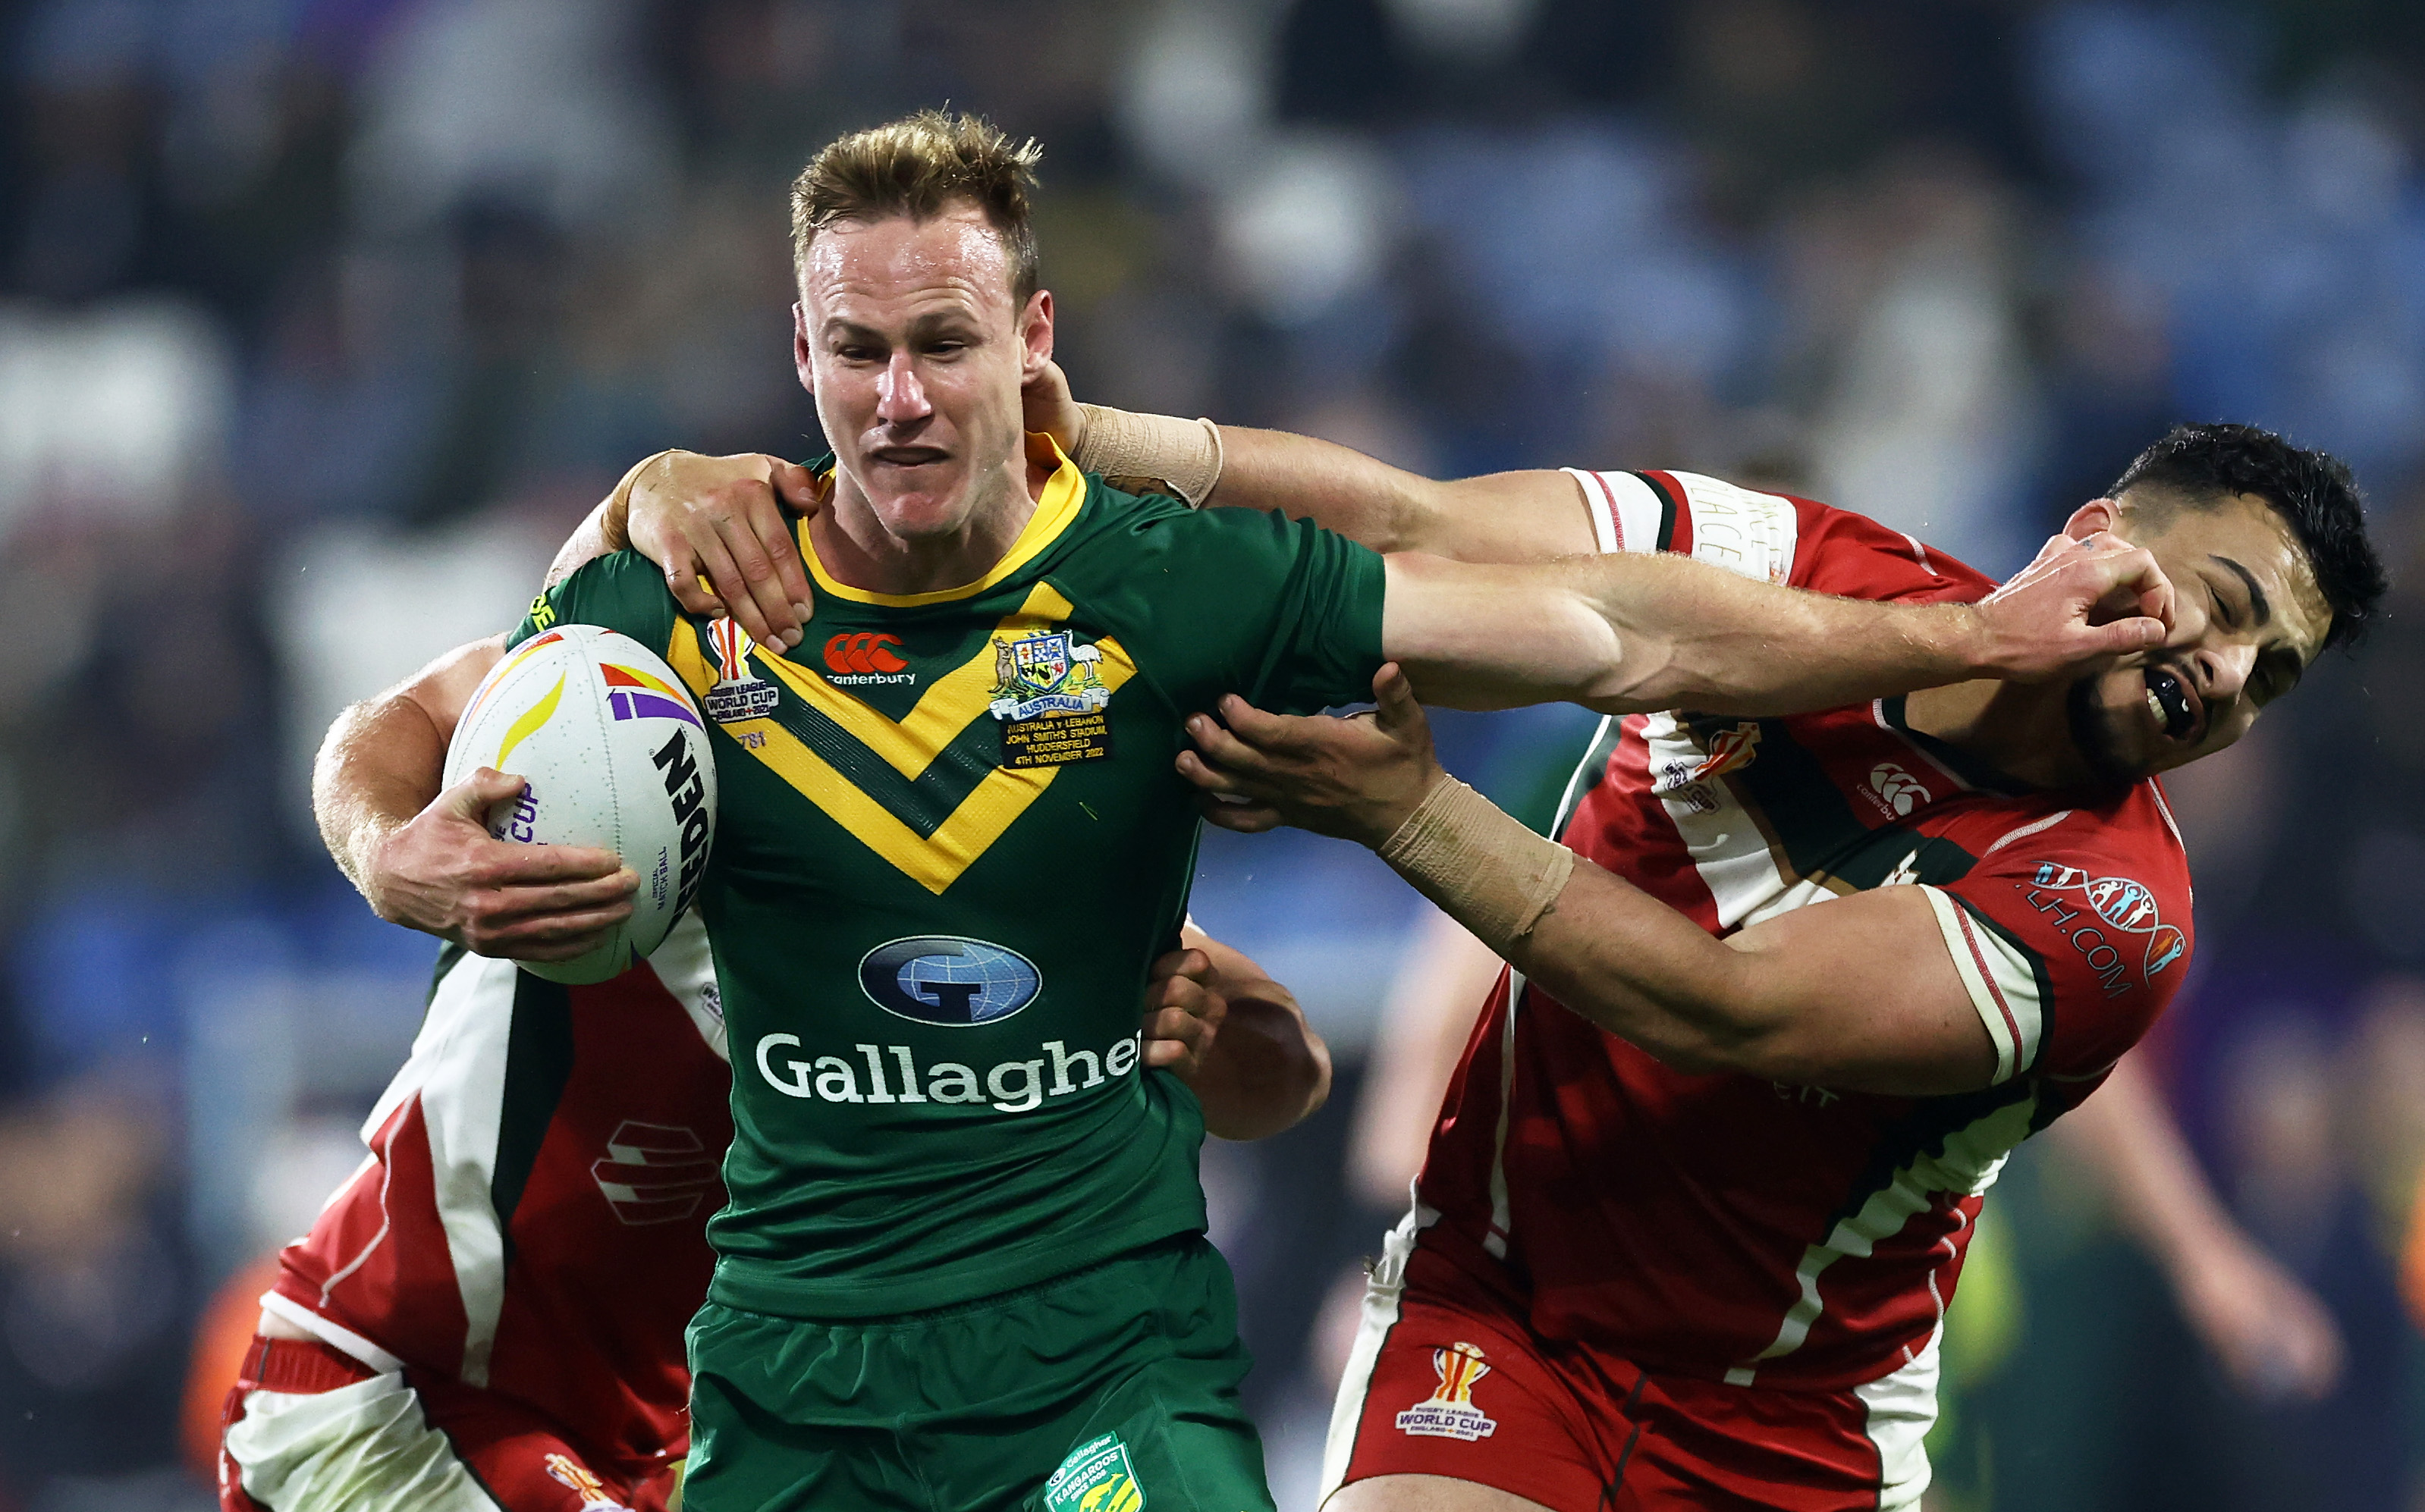 Rugby League World Cup 2022 Australia Kangaroos team news vs New Zealand semi final, Daly Cherry-Evans dropped